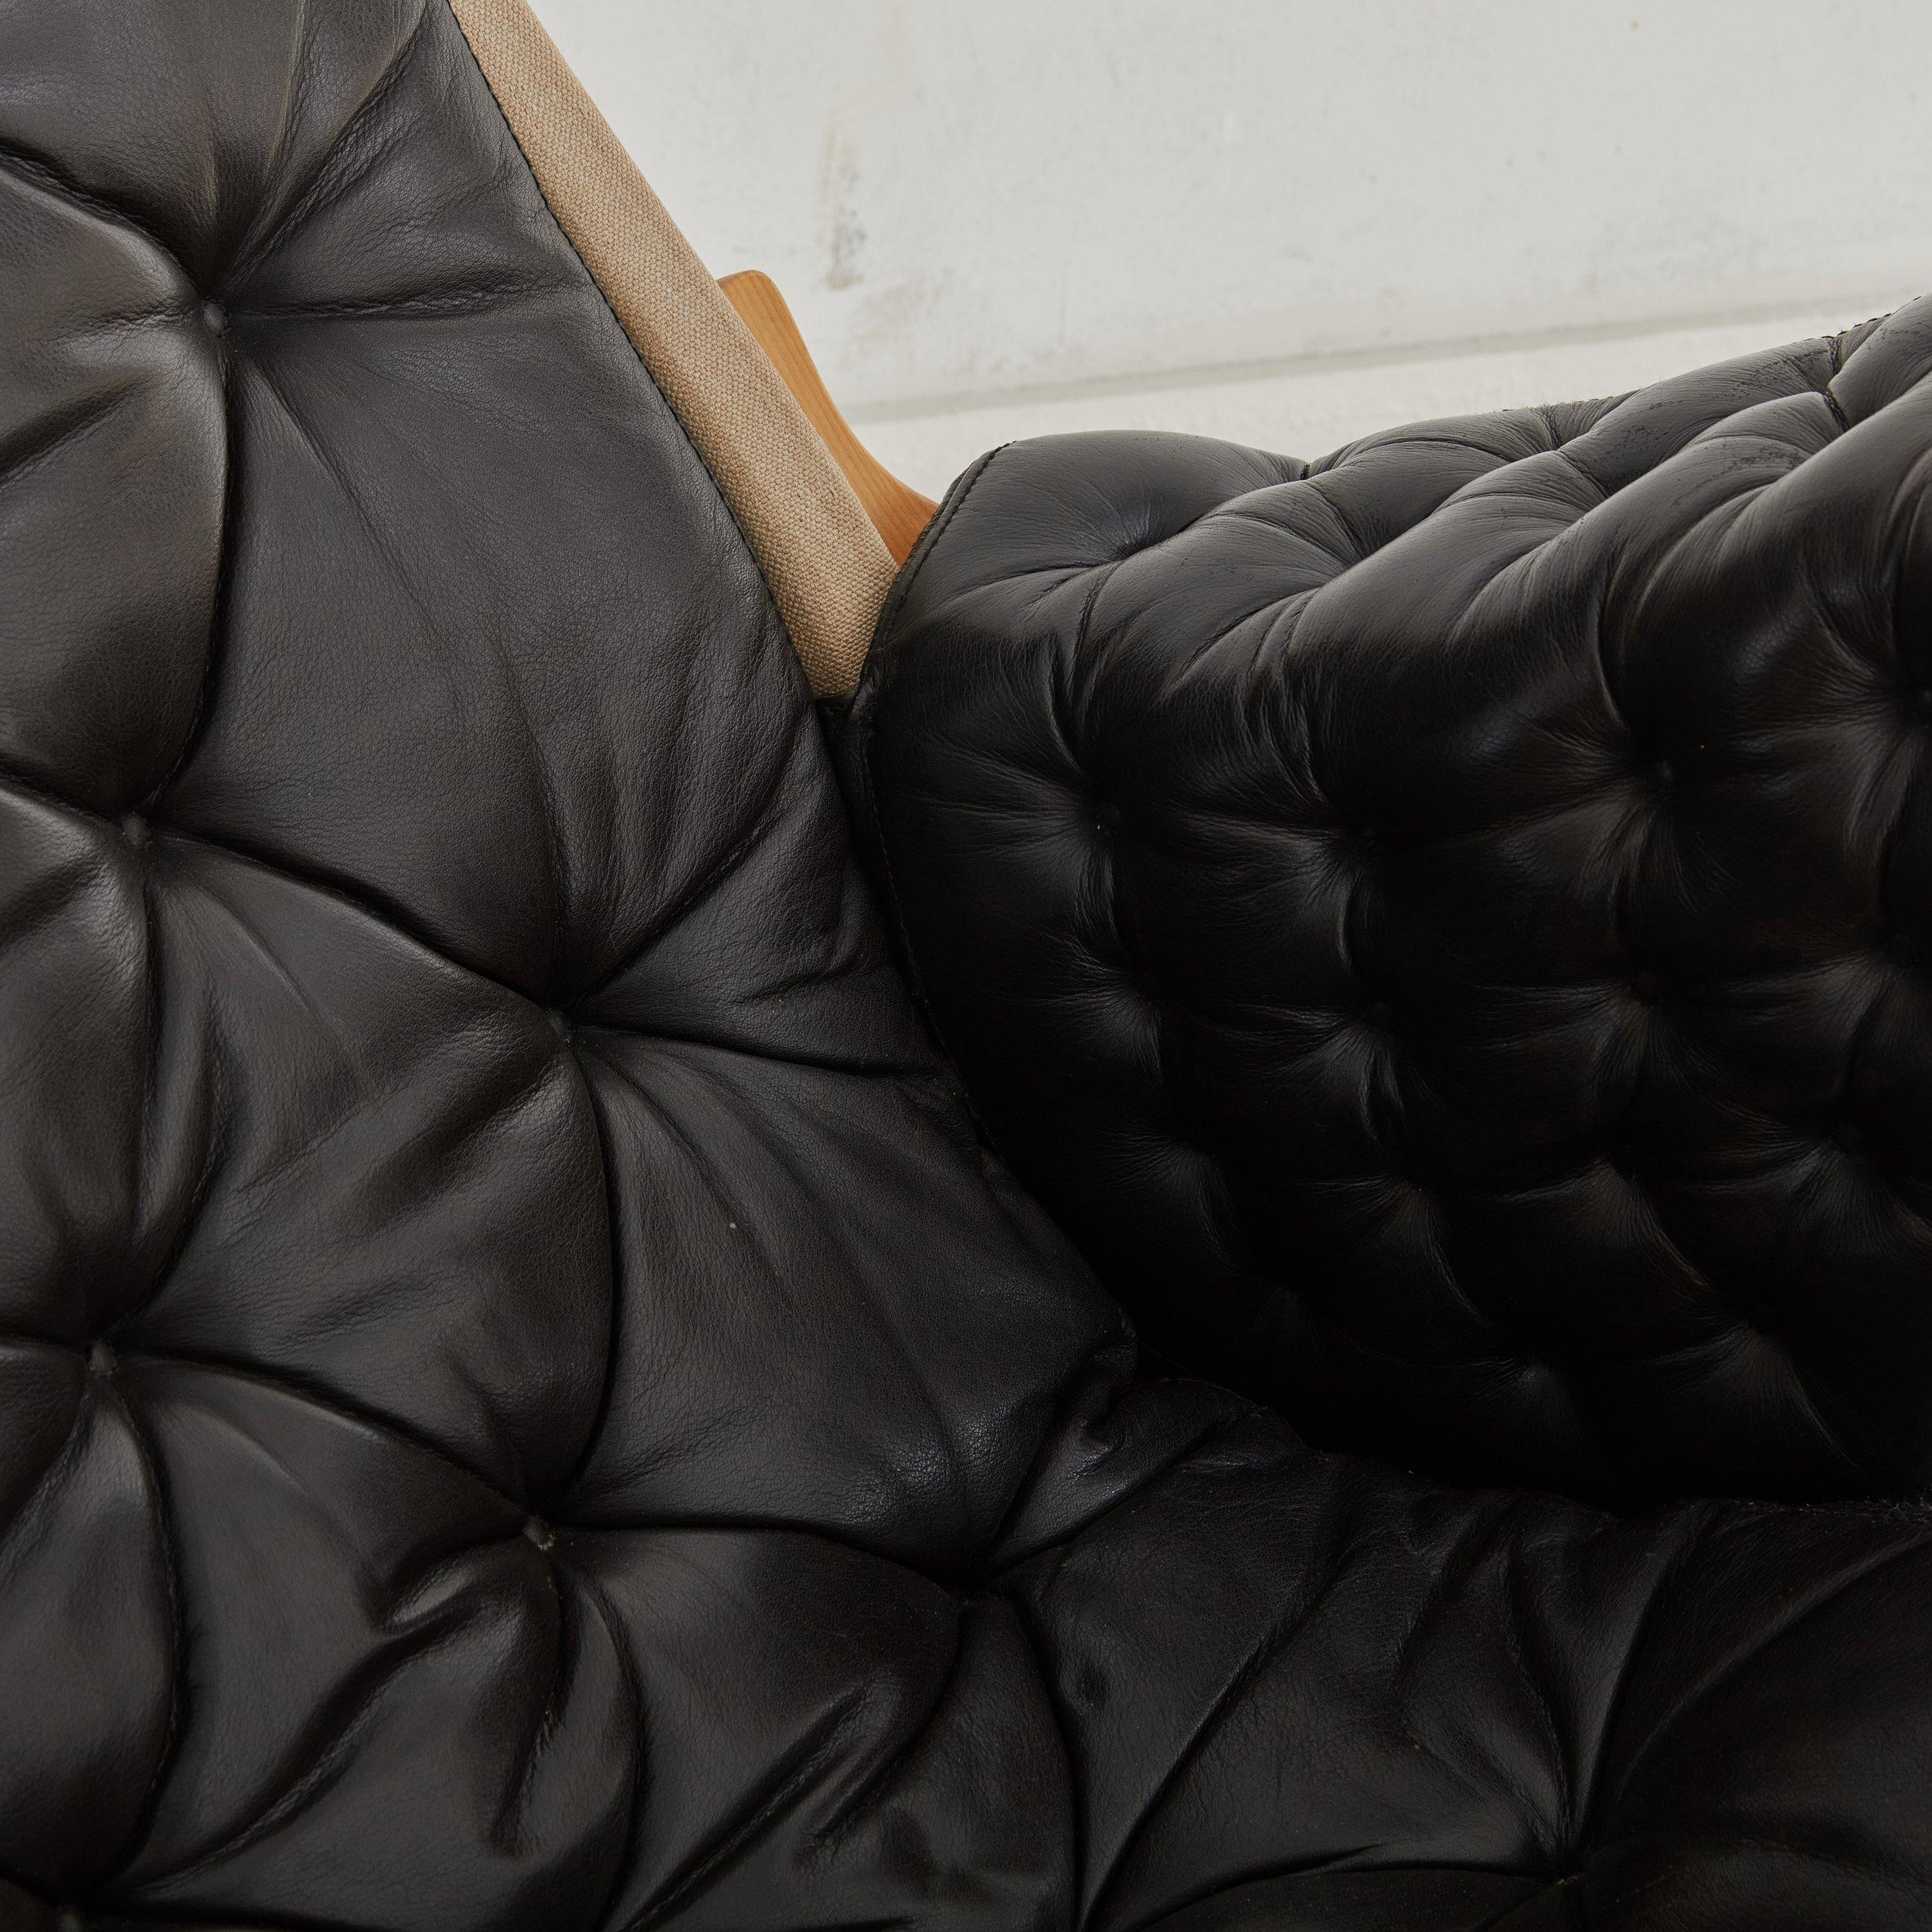 Black Leather Tufted 'Pernilla' Armchair by Bruno Mathsson for DUX, Sweden 1960s For Sale 5